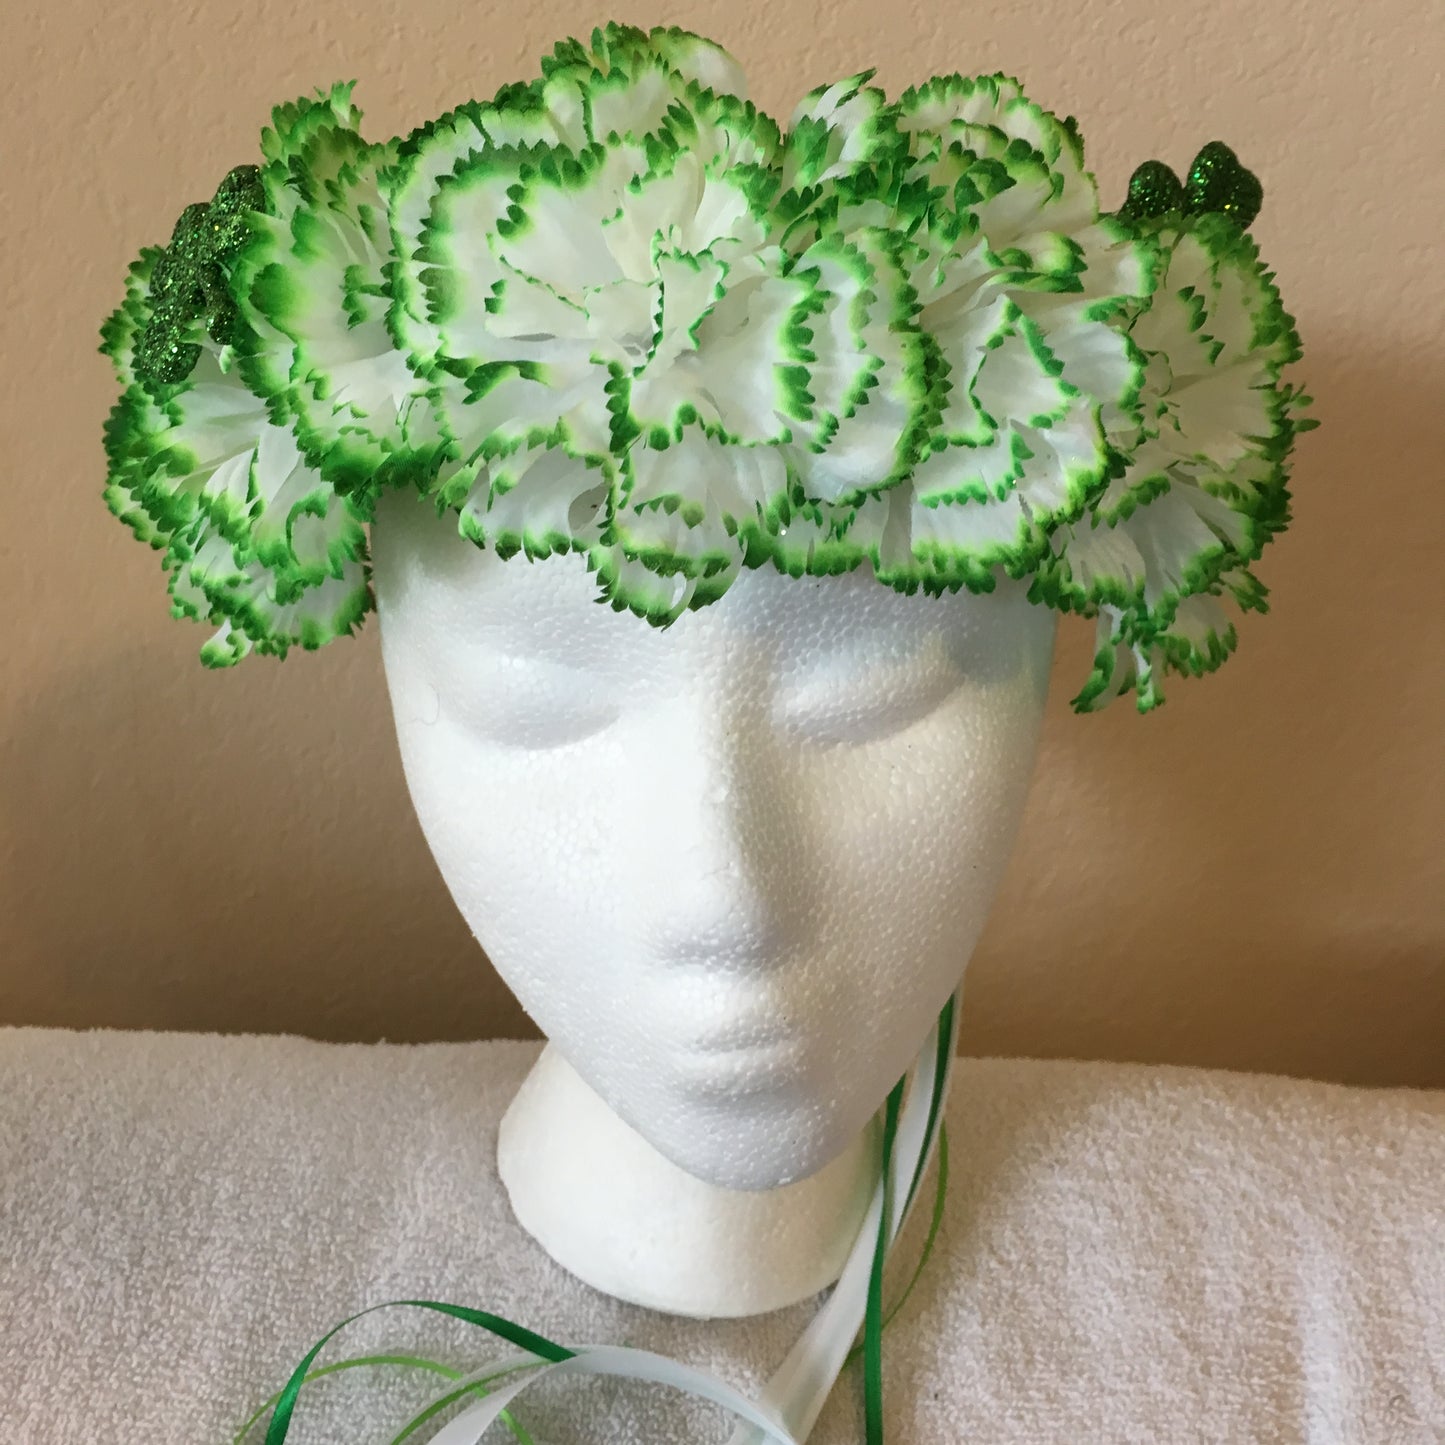 Show Special Wreath - All green tipped white carnations w/ two shamrock accents